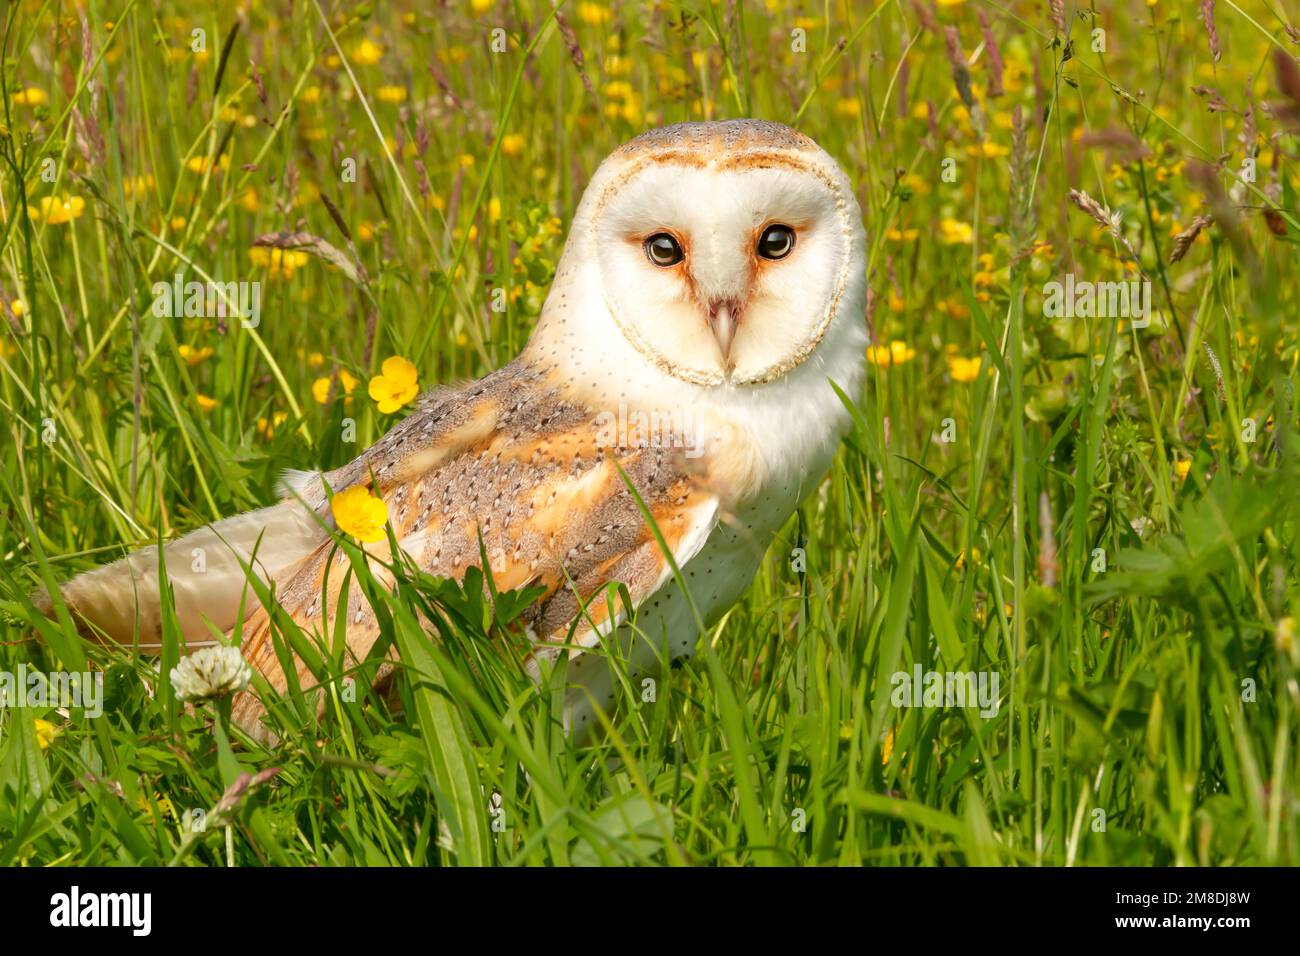 Barn Owl, beautiful white owl with heart shaped facial disc, facing front in a colourful, wildflower summer meadow with buttercups and clover.     Sci Stock Photo